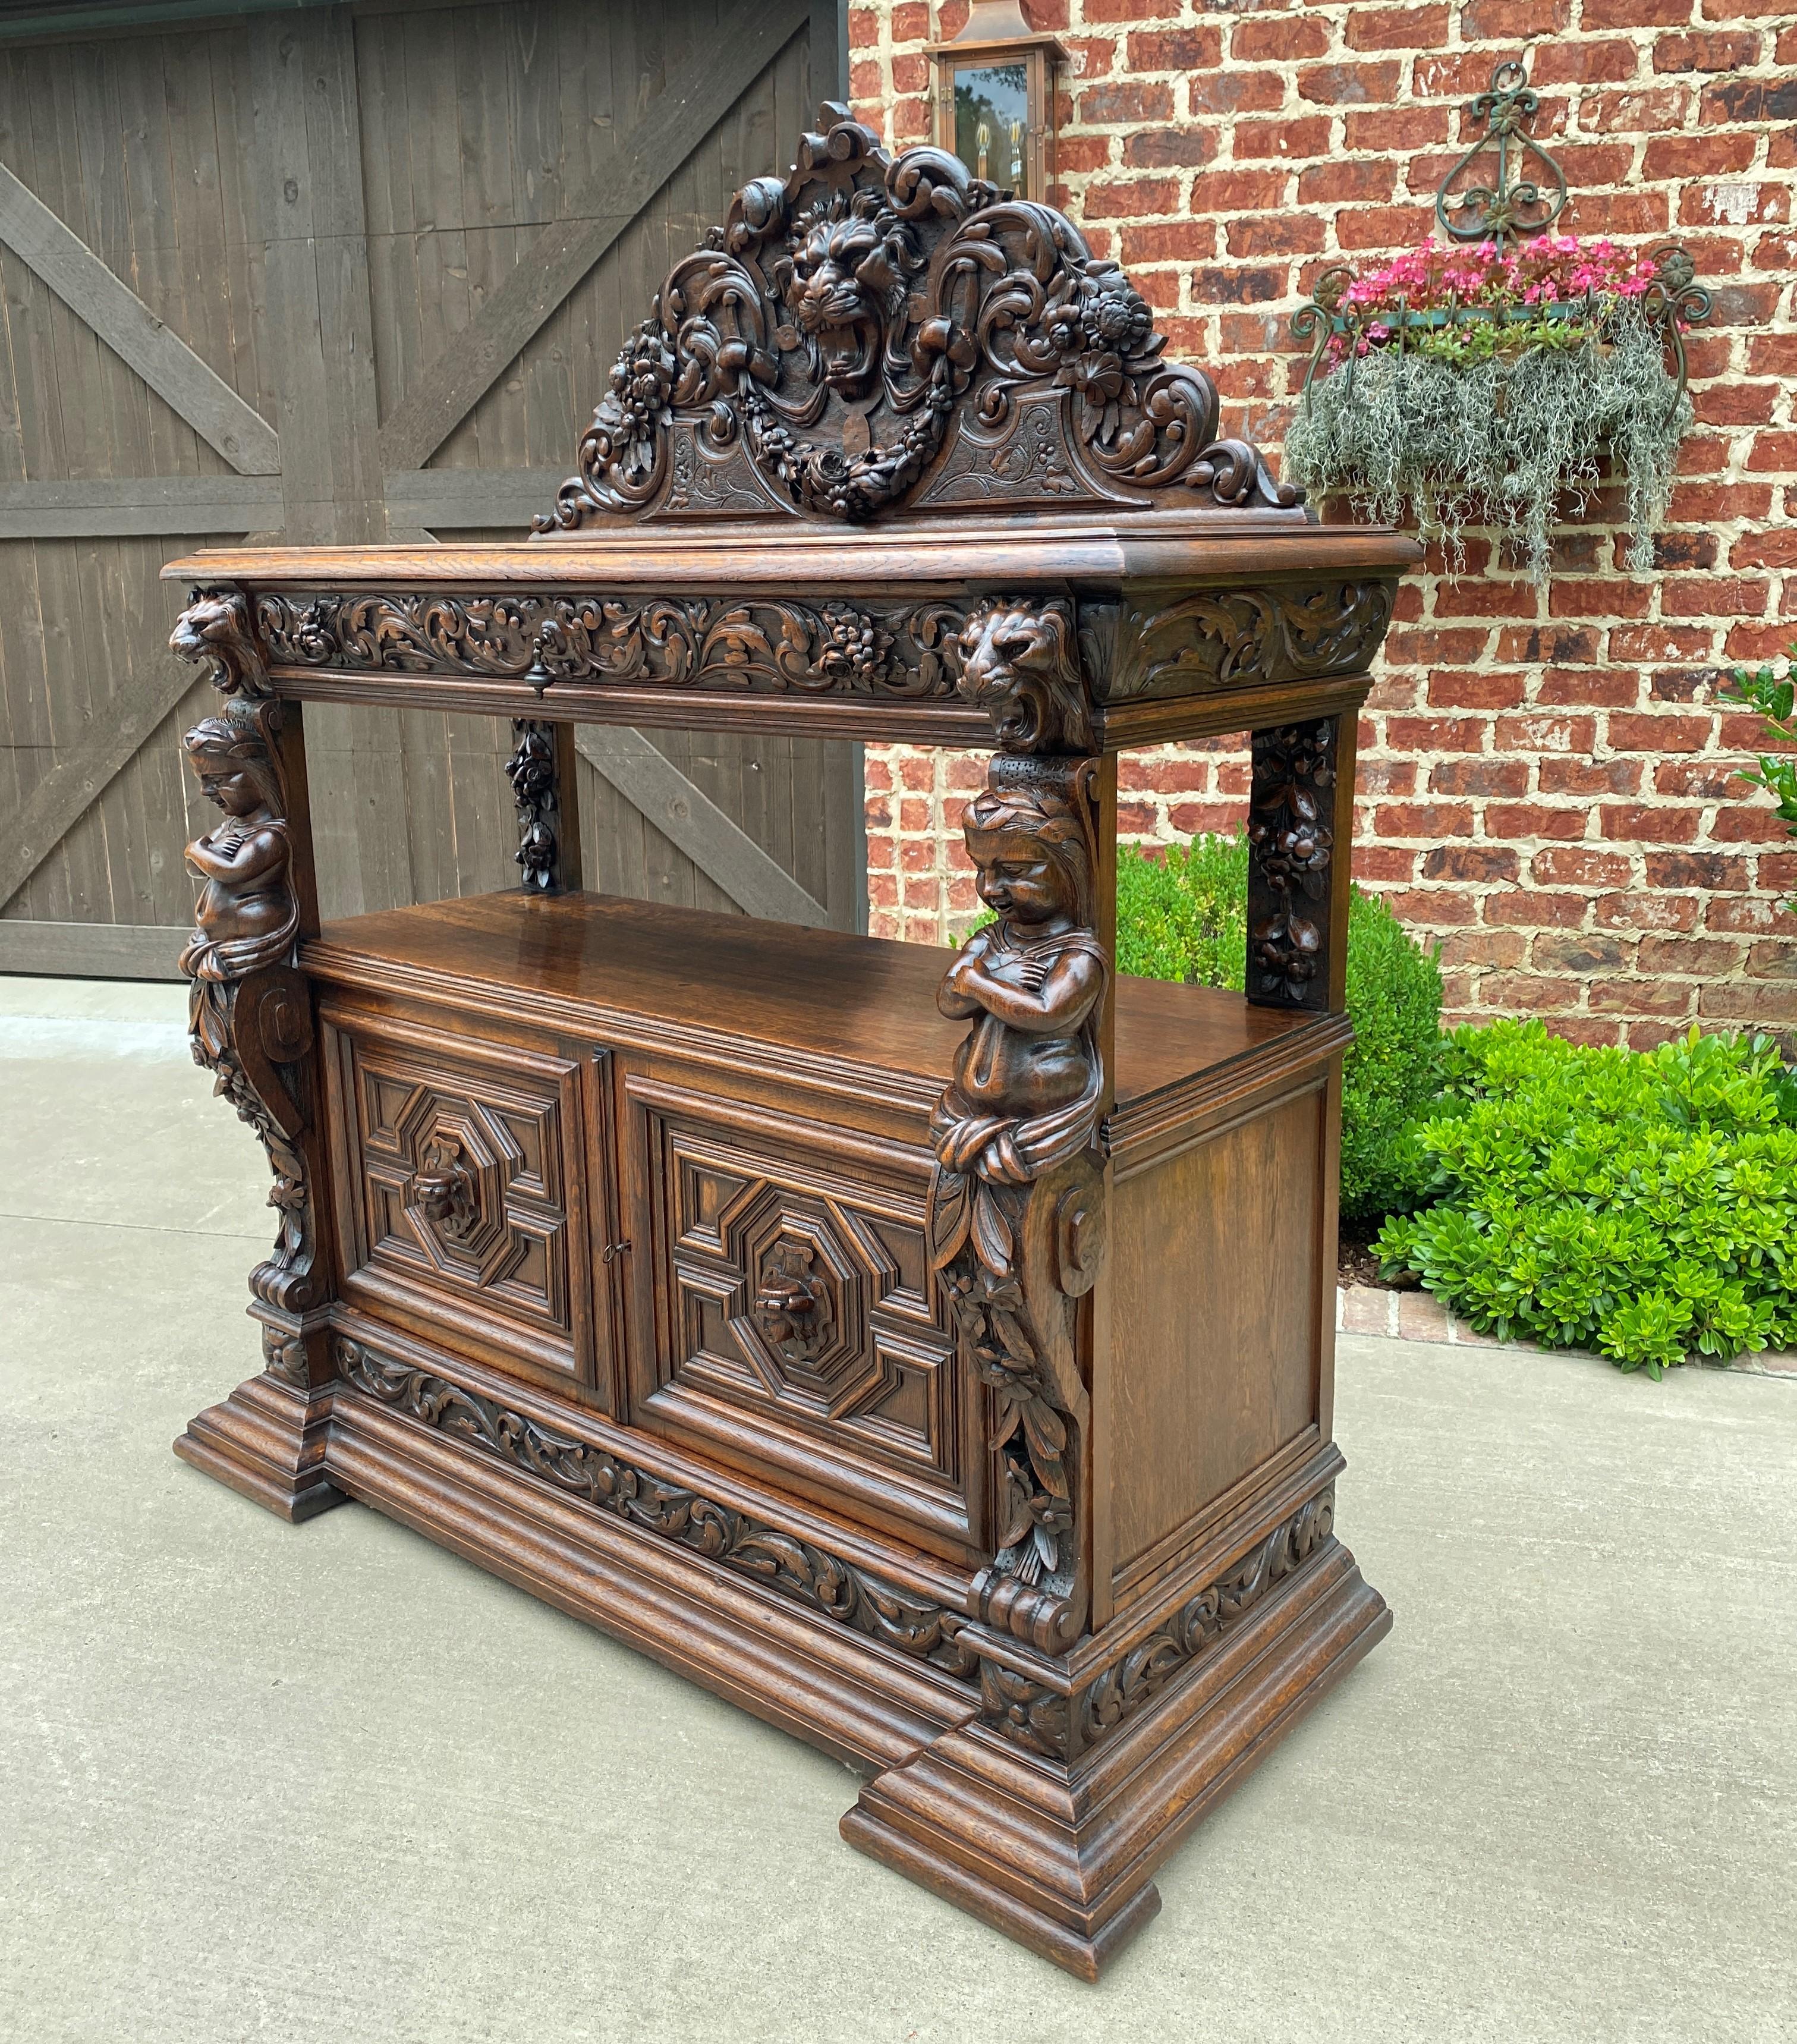 Exquisite antique french gothic revival highly carved oak sideboard/server/buffet/cabinet~~c. 1880s.

Beautiful highly carved antique French Gothic Revival oak sideboard, buffet, server, or cabinet with a beautifully carved mask crown and corner